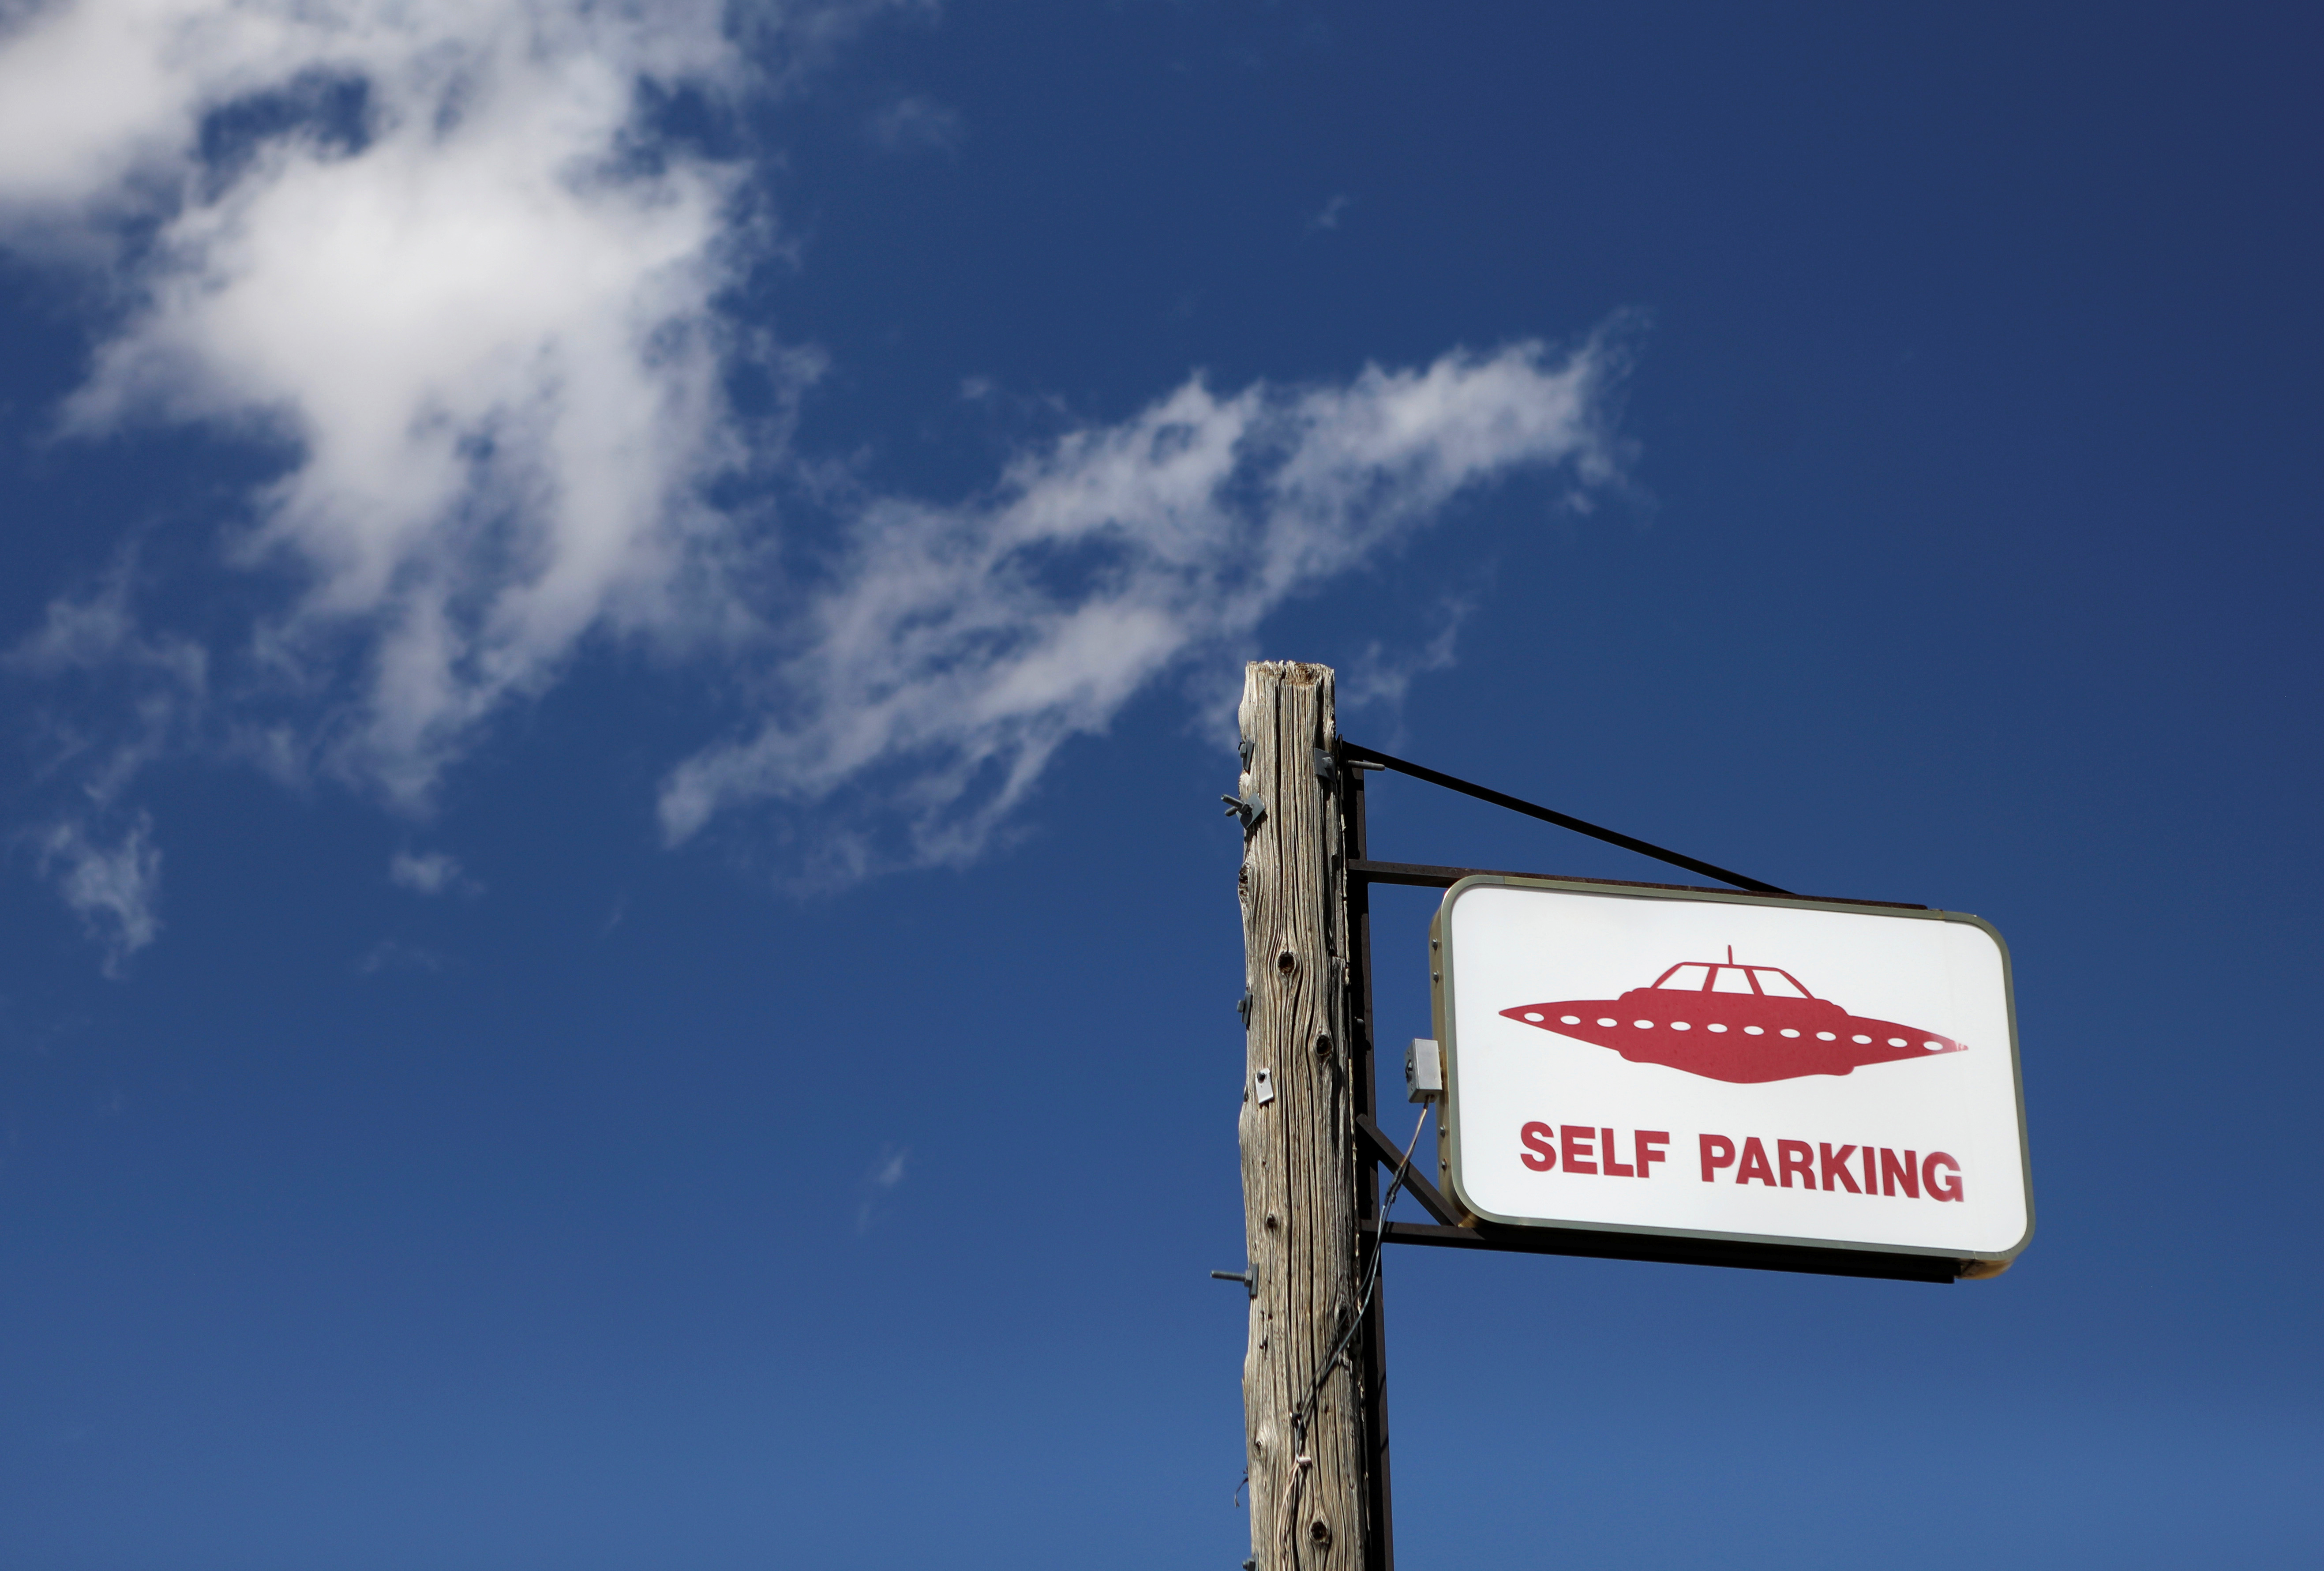 A parking sign at the Little A'Le'Inn as an influx of tourists responding to a call to 'storm' Area 51, a secretive U.S. military base believed by UFO enthusiasts to hold government secrets about extra-terrestrials, is expected in Rachel, Nevada, U.S. September 19, 2019. REUTERS/Jim Urquhart/File Photo